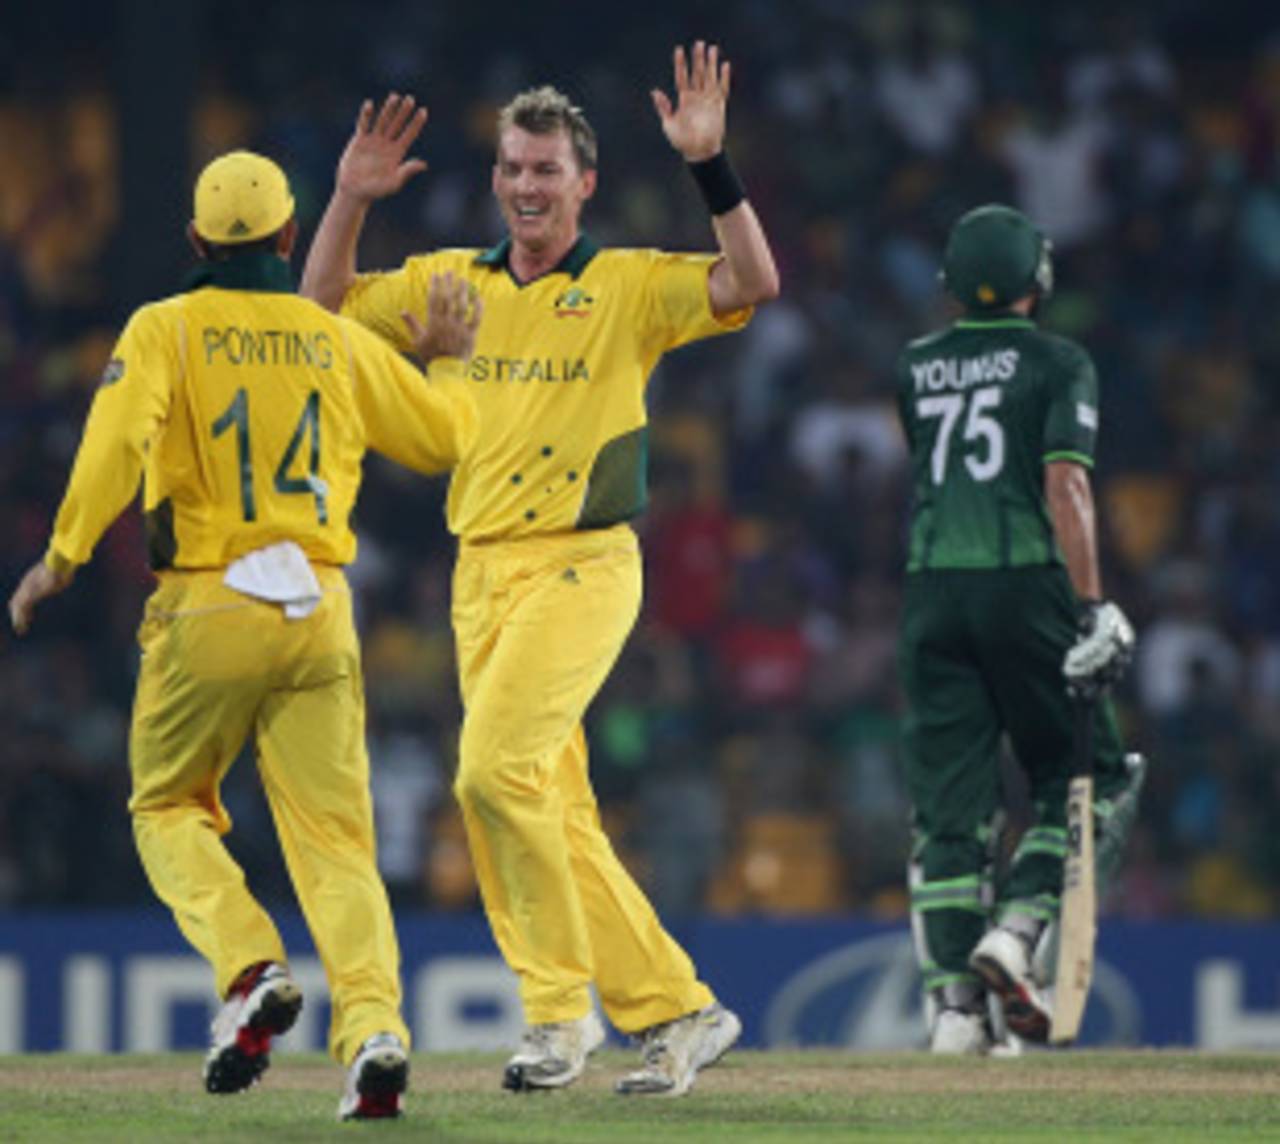 Brett Lee returned with the old ball to remove Younis Khan, Australia v Pakistan, Group A, World Cup 2011, Colombo, March 19, 2011